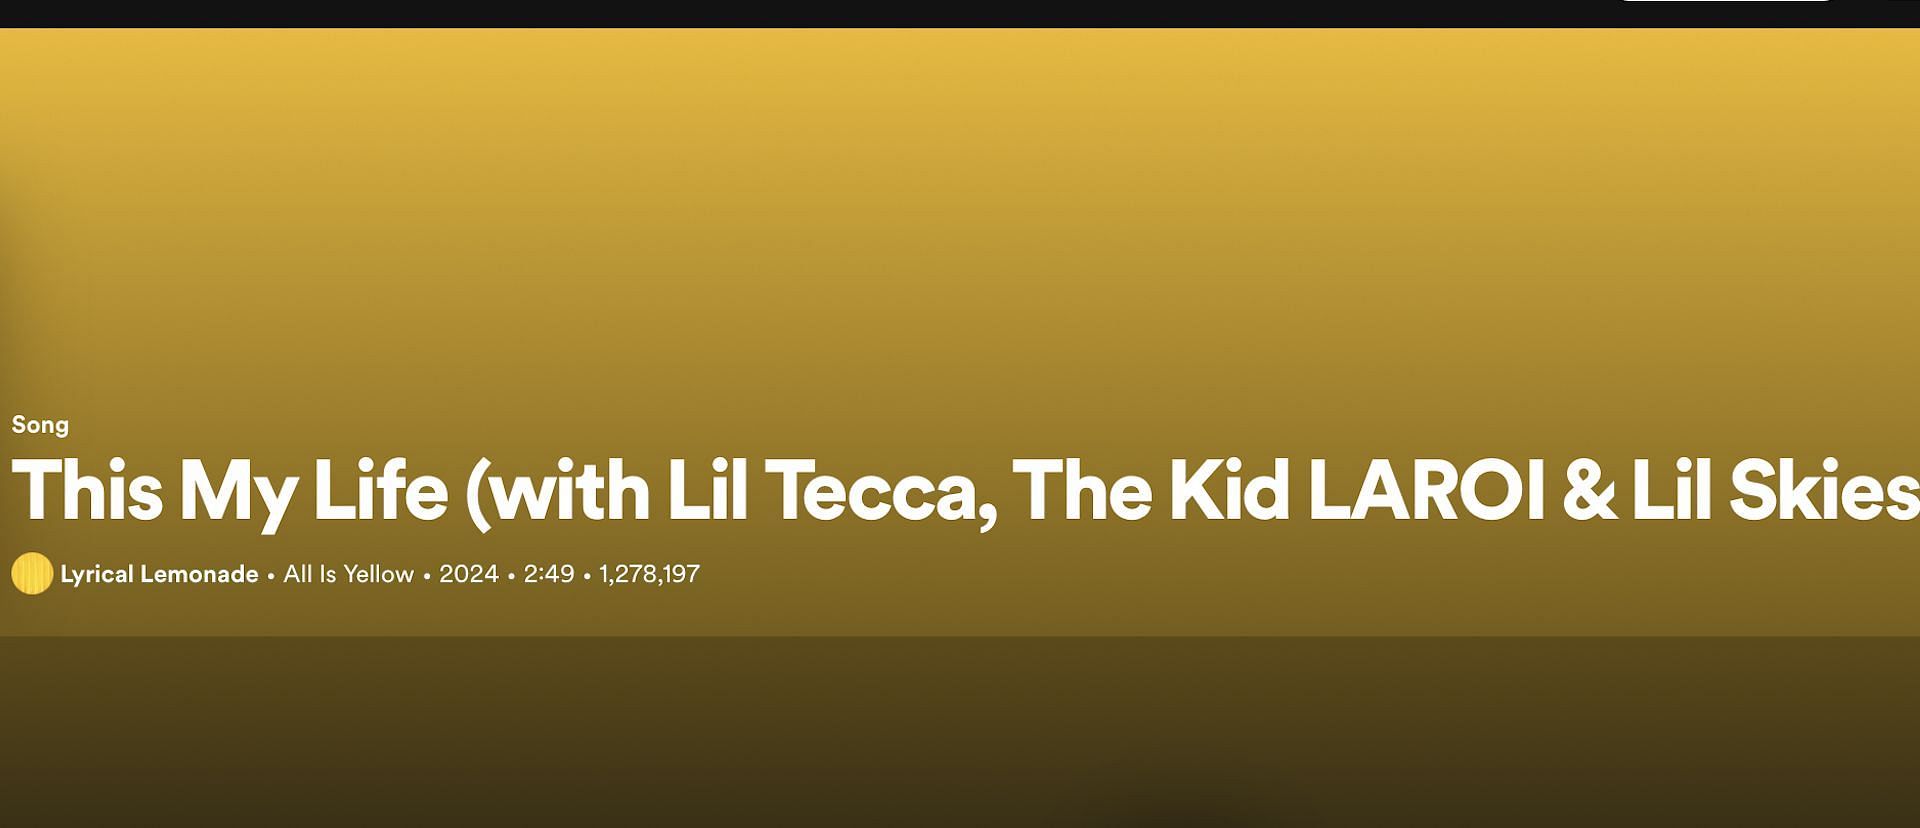 Track 4 from Lyrical Lemonade&#039;s All Is Yellow (Image via Spotify)